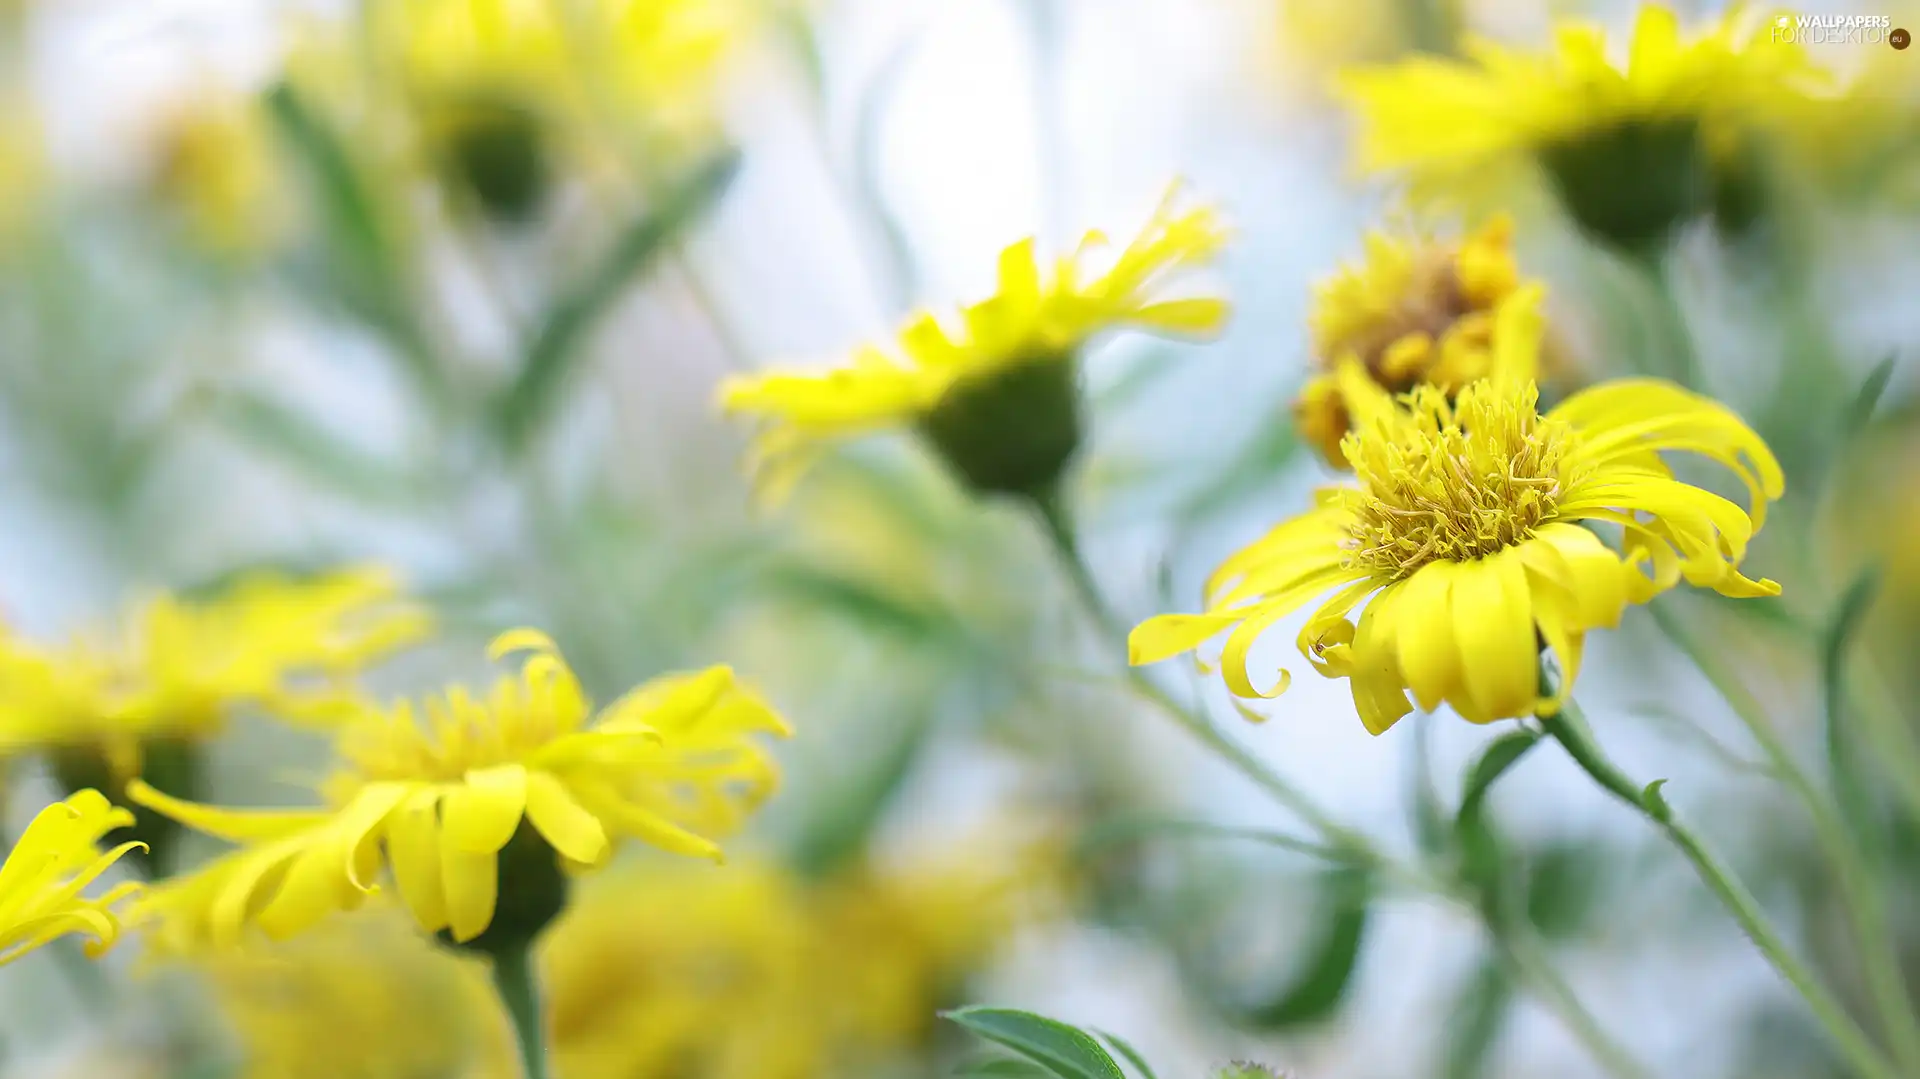 blurry background, Yellow, Flowers